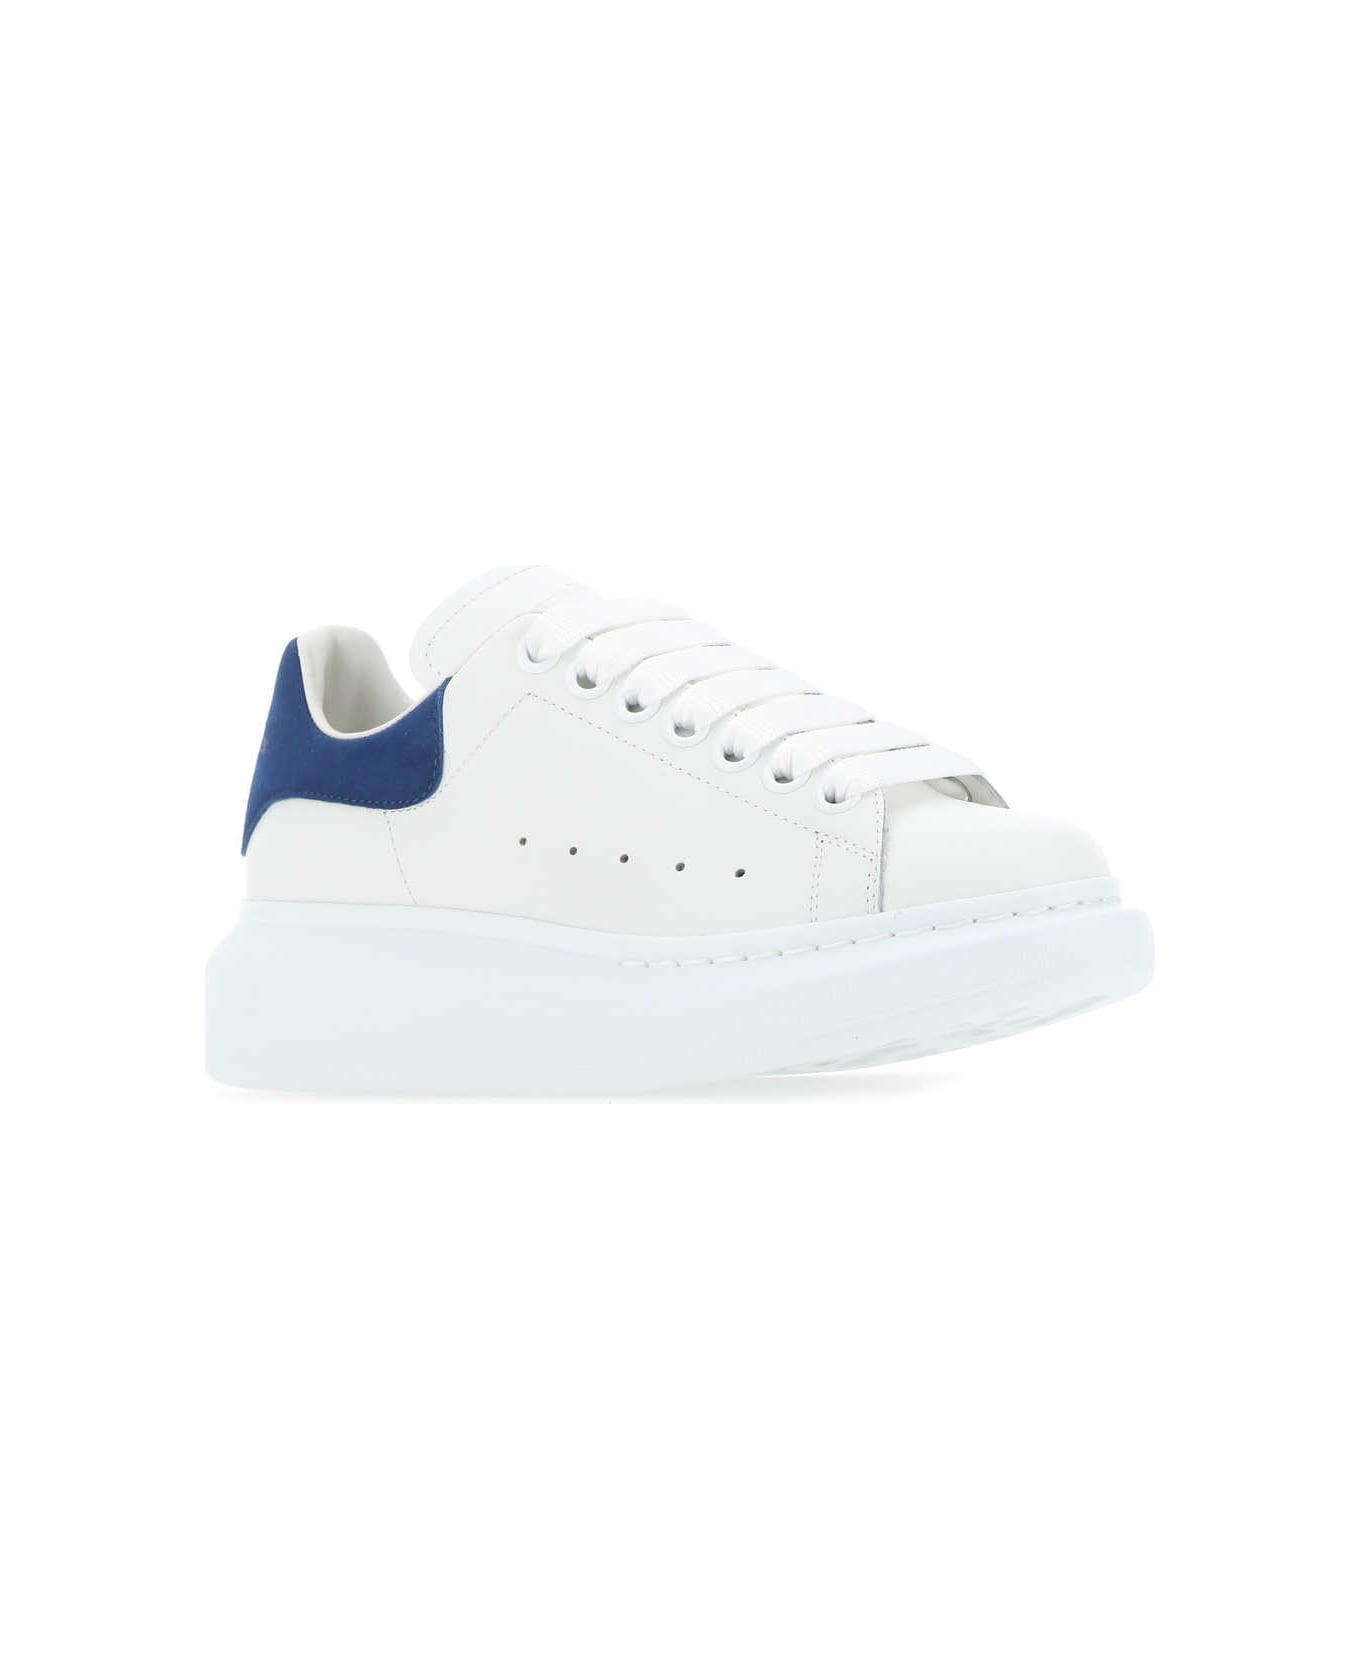 Alexander McQueen White Leather Sneakers With Blue Suede Heel - 9086